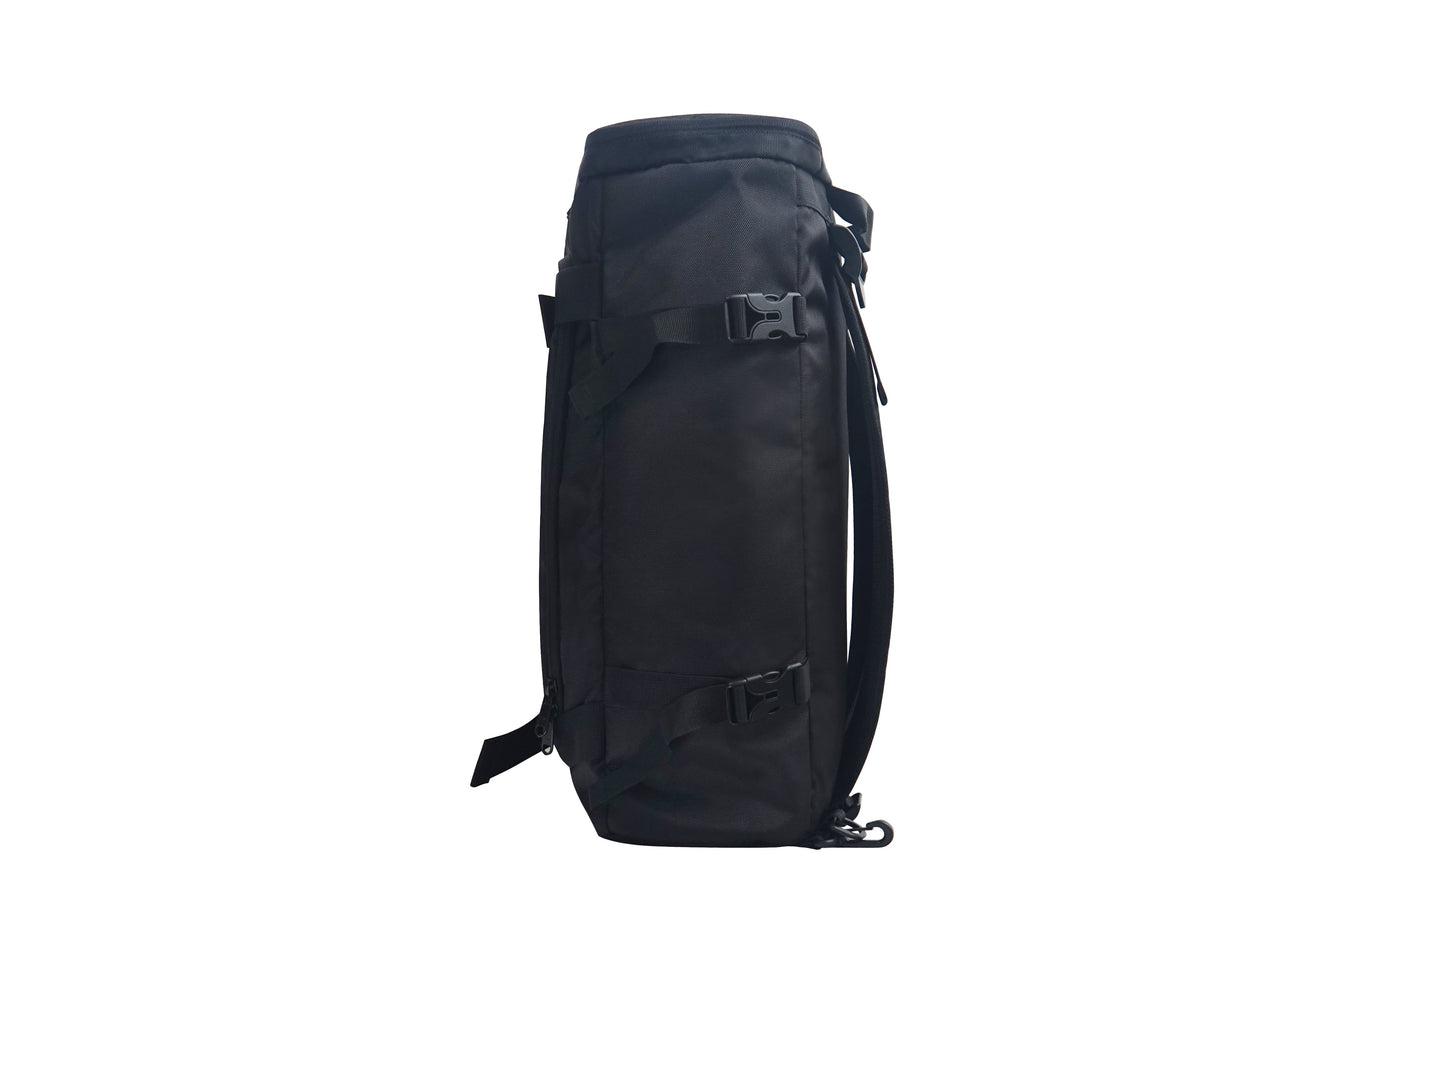 Accra Backpack - Black